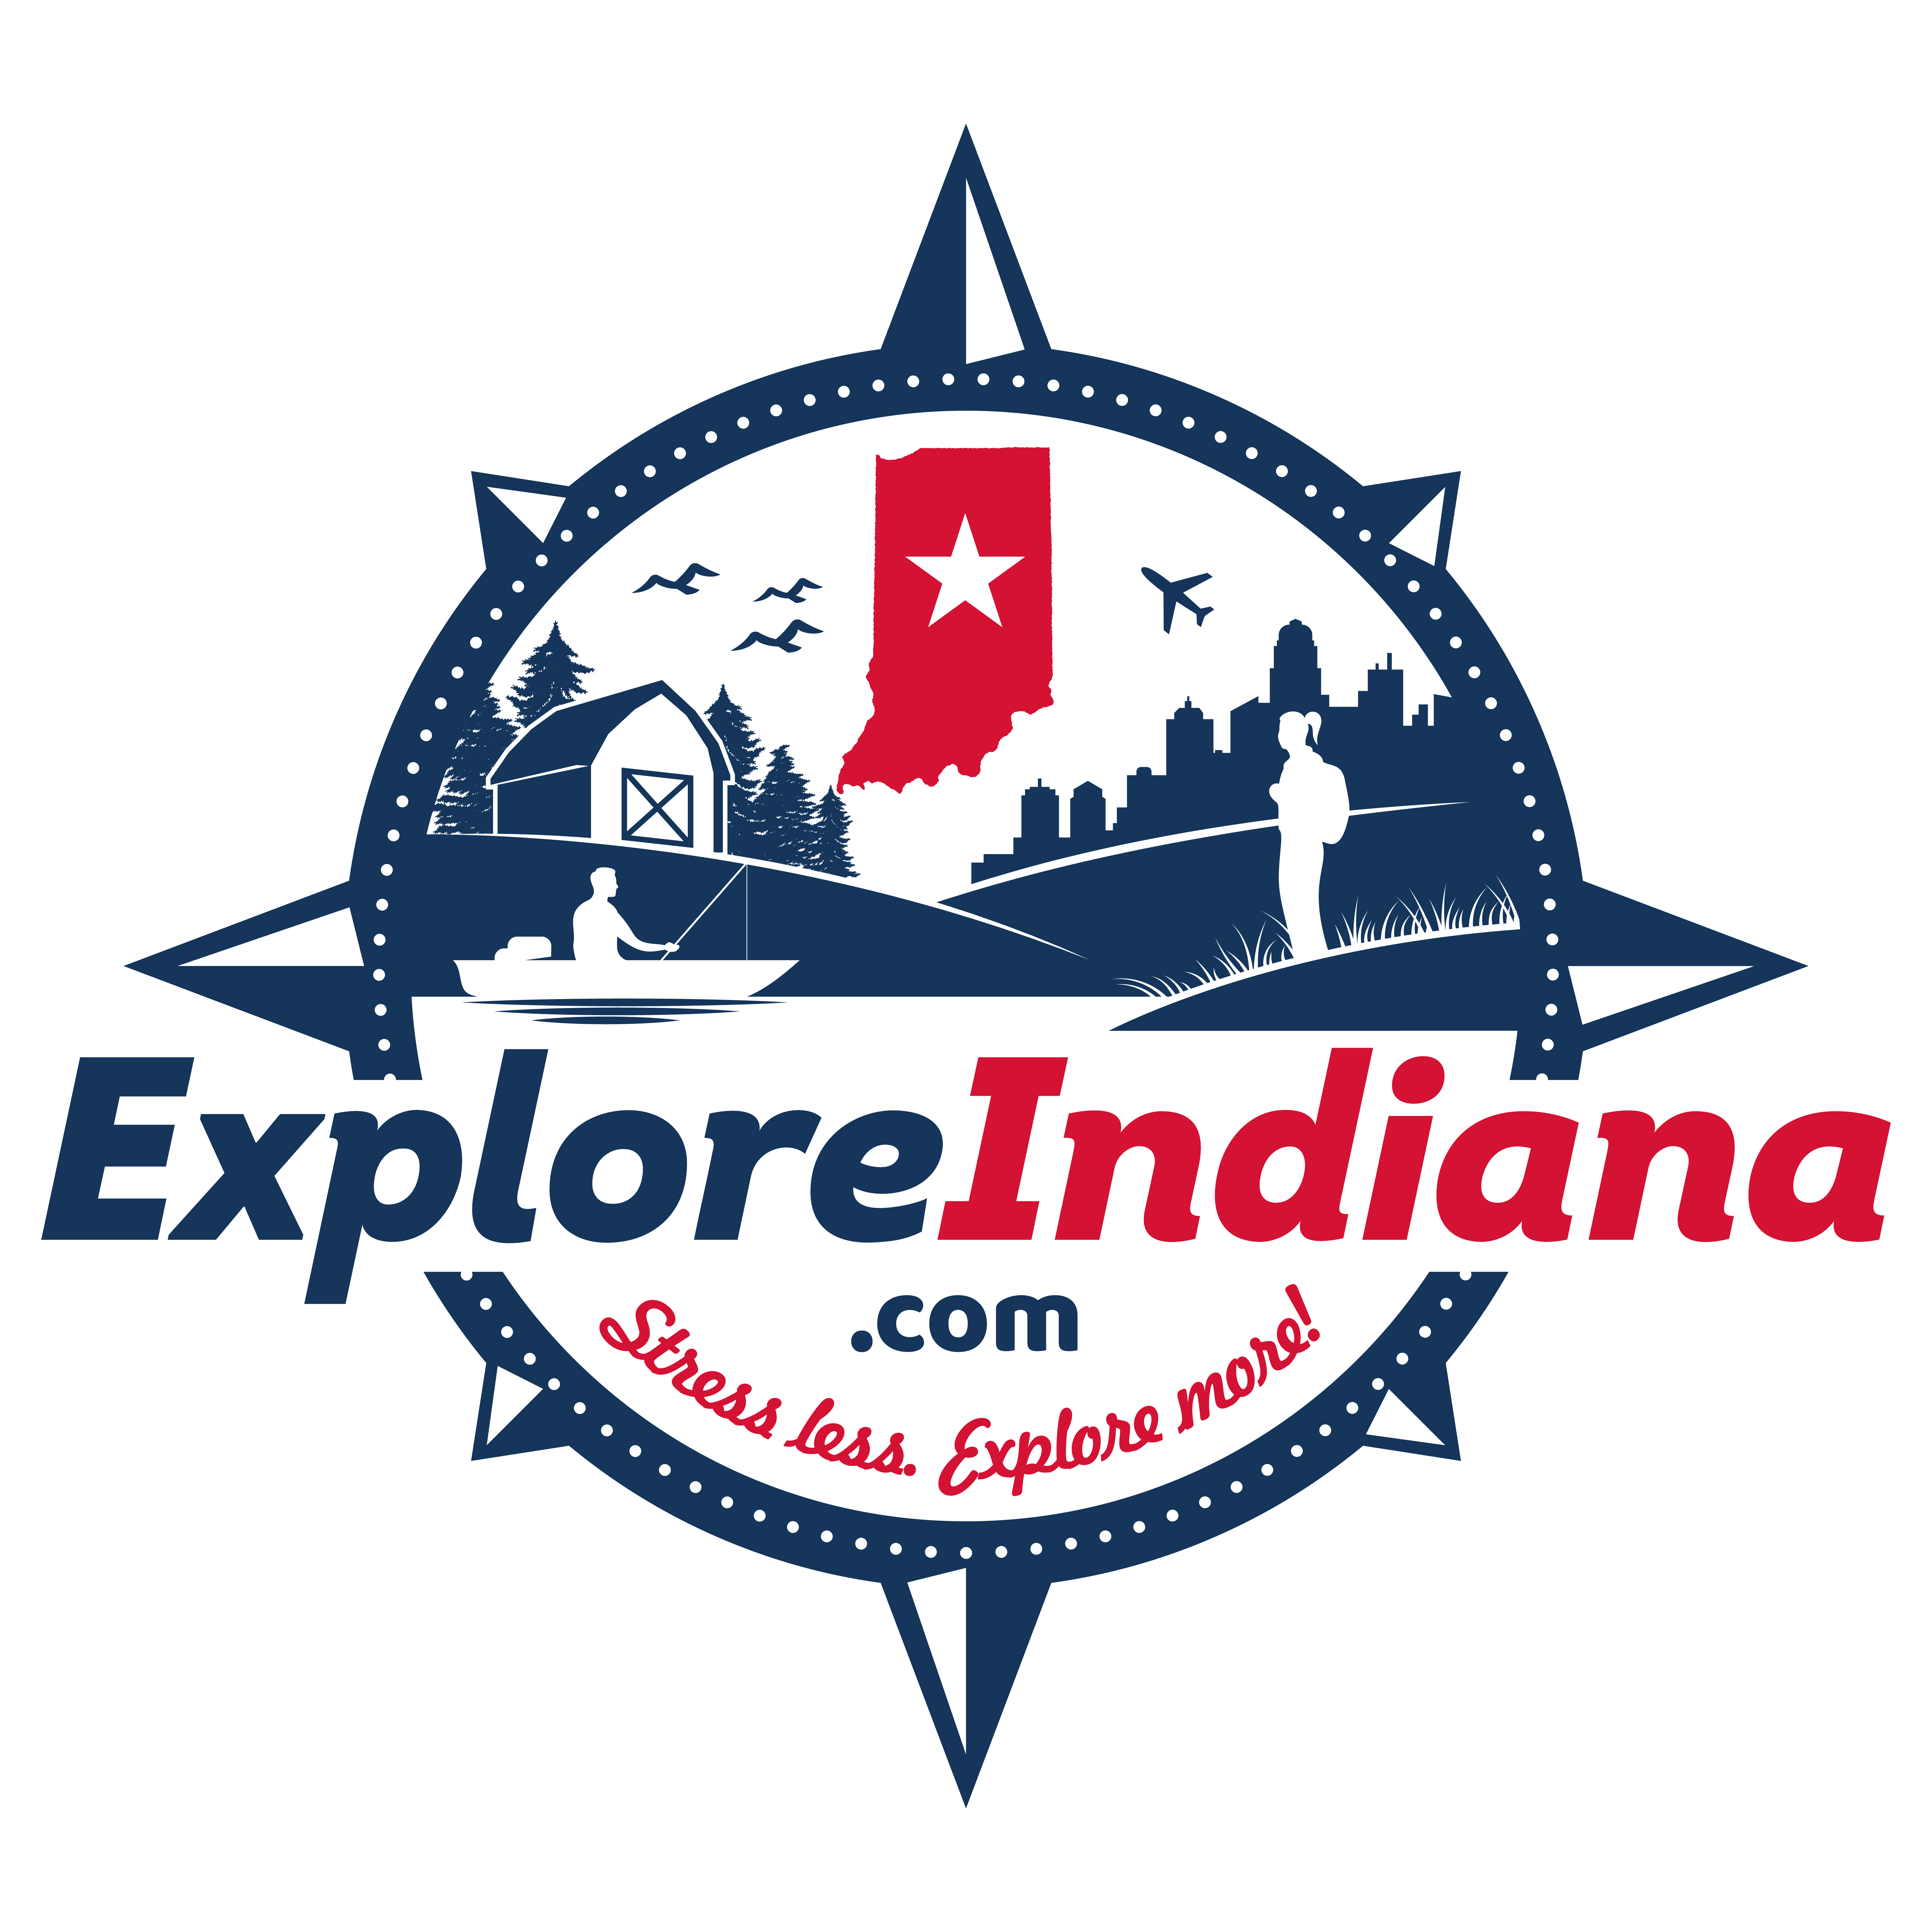 Indiana events, family fun activities, sports, vacations